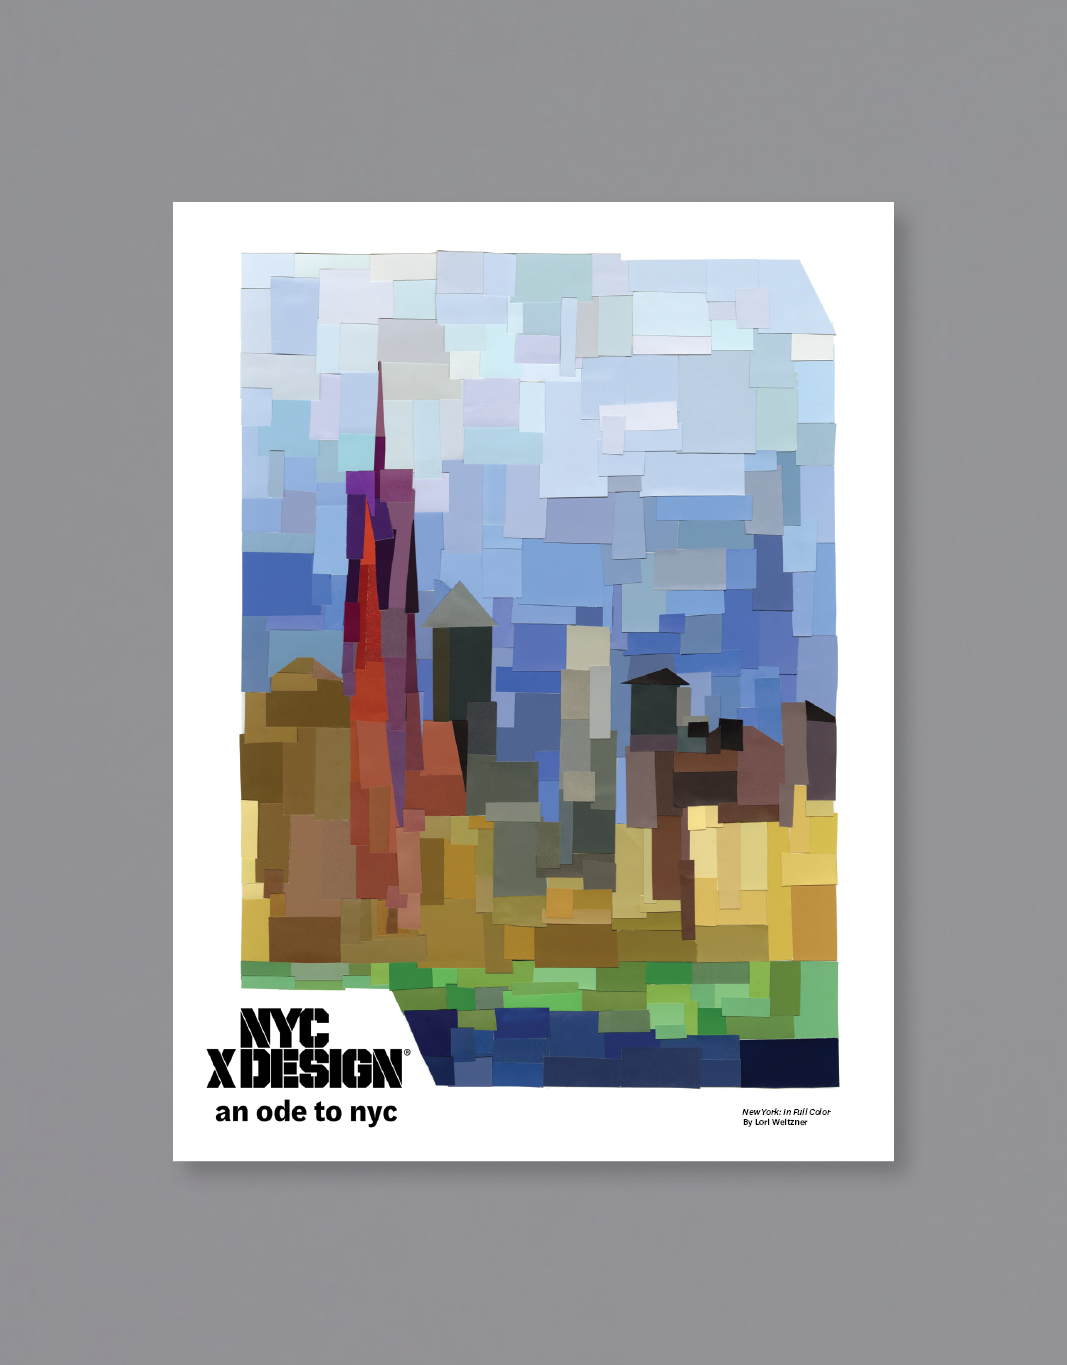 A poster of New York City, around The World Trade Center drawn in impressionism style.